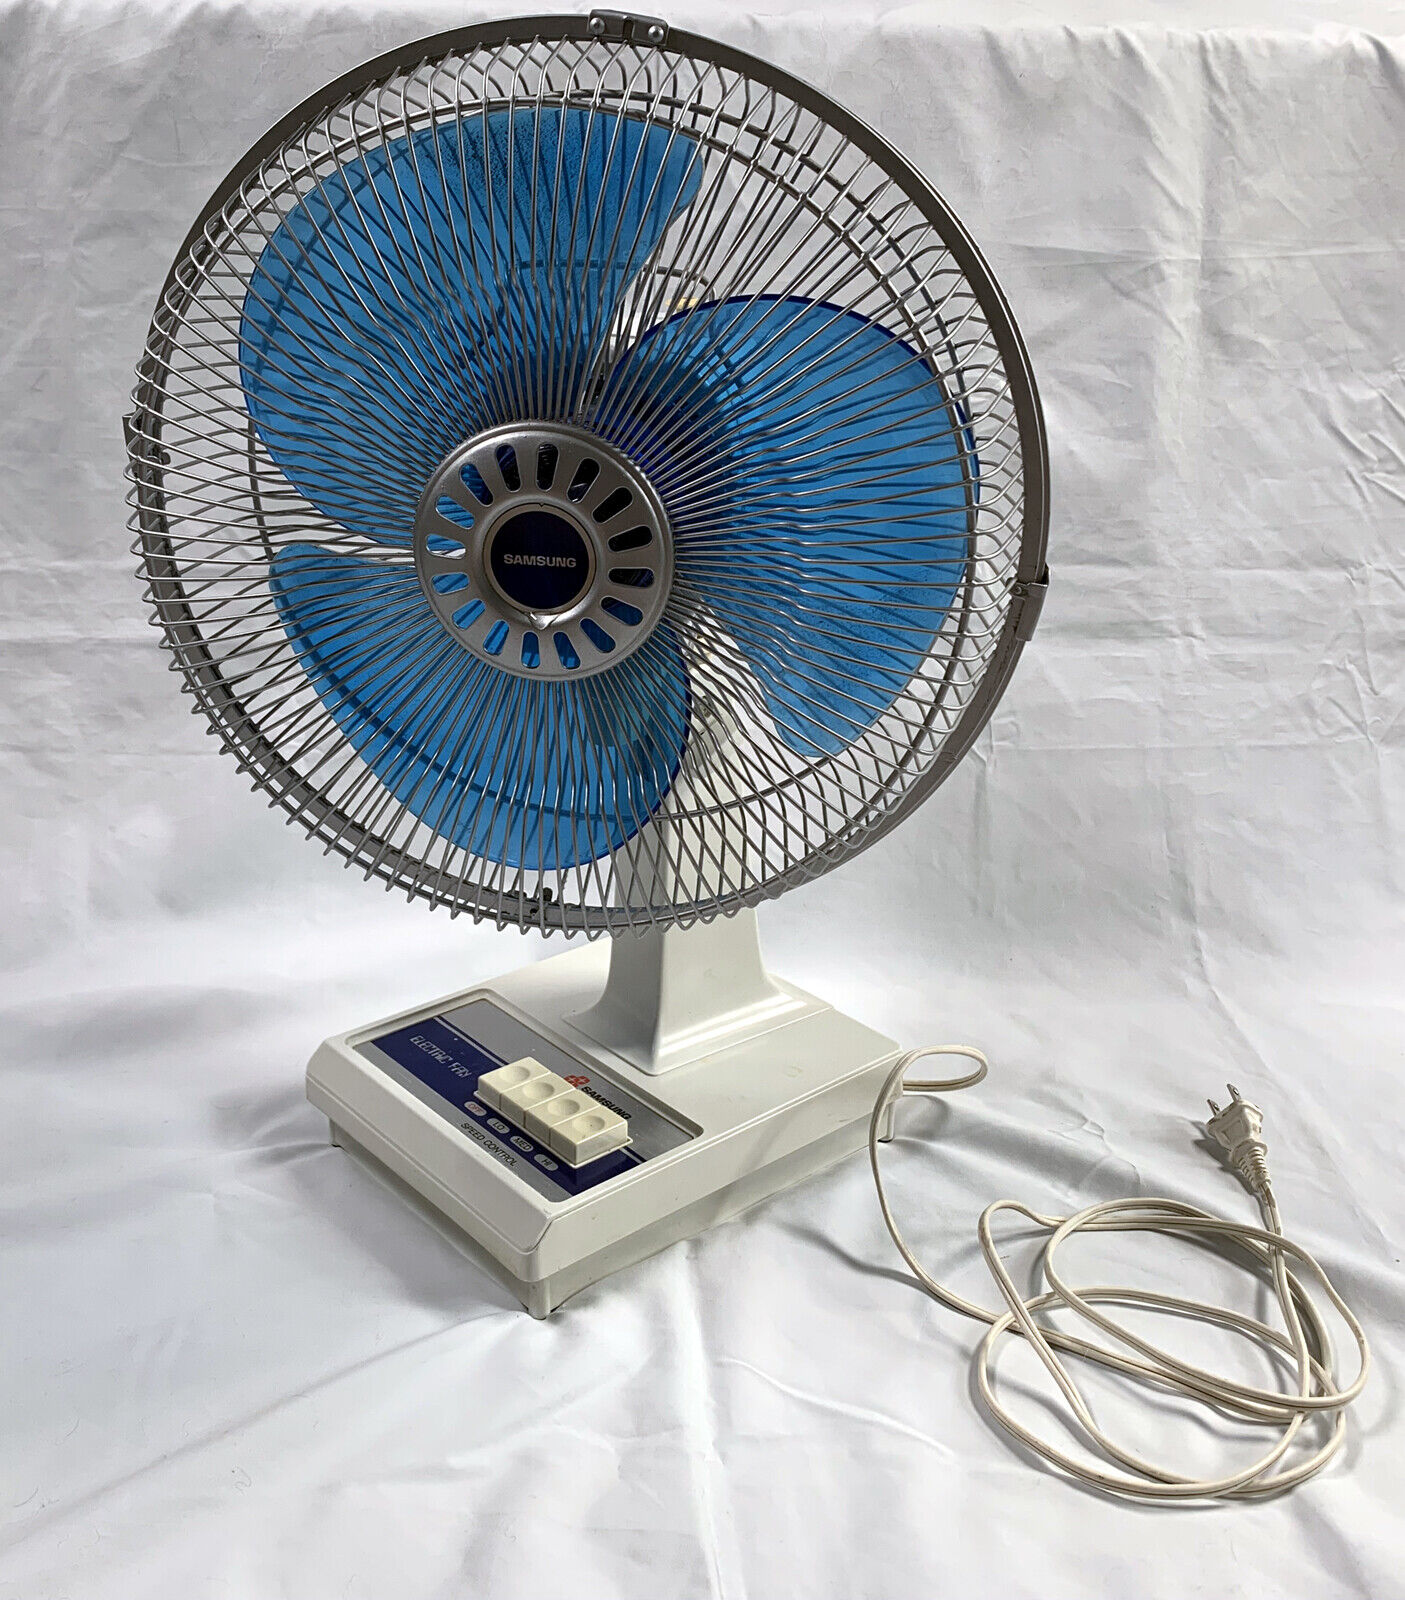  Vintage SAMSUNG Electric 3 Speed Tabletop Oscillating Fan SF-1200A BLUE Blades